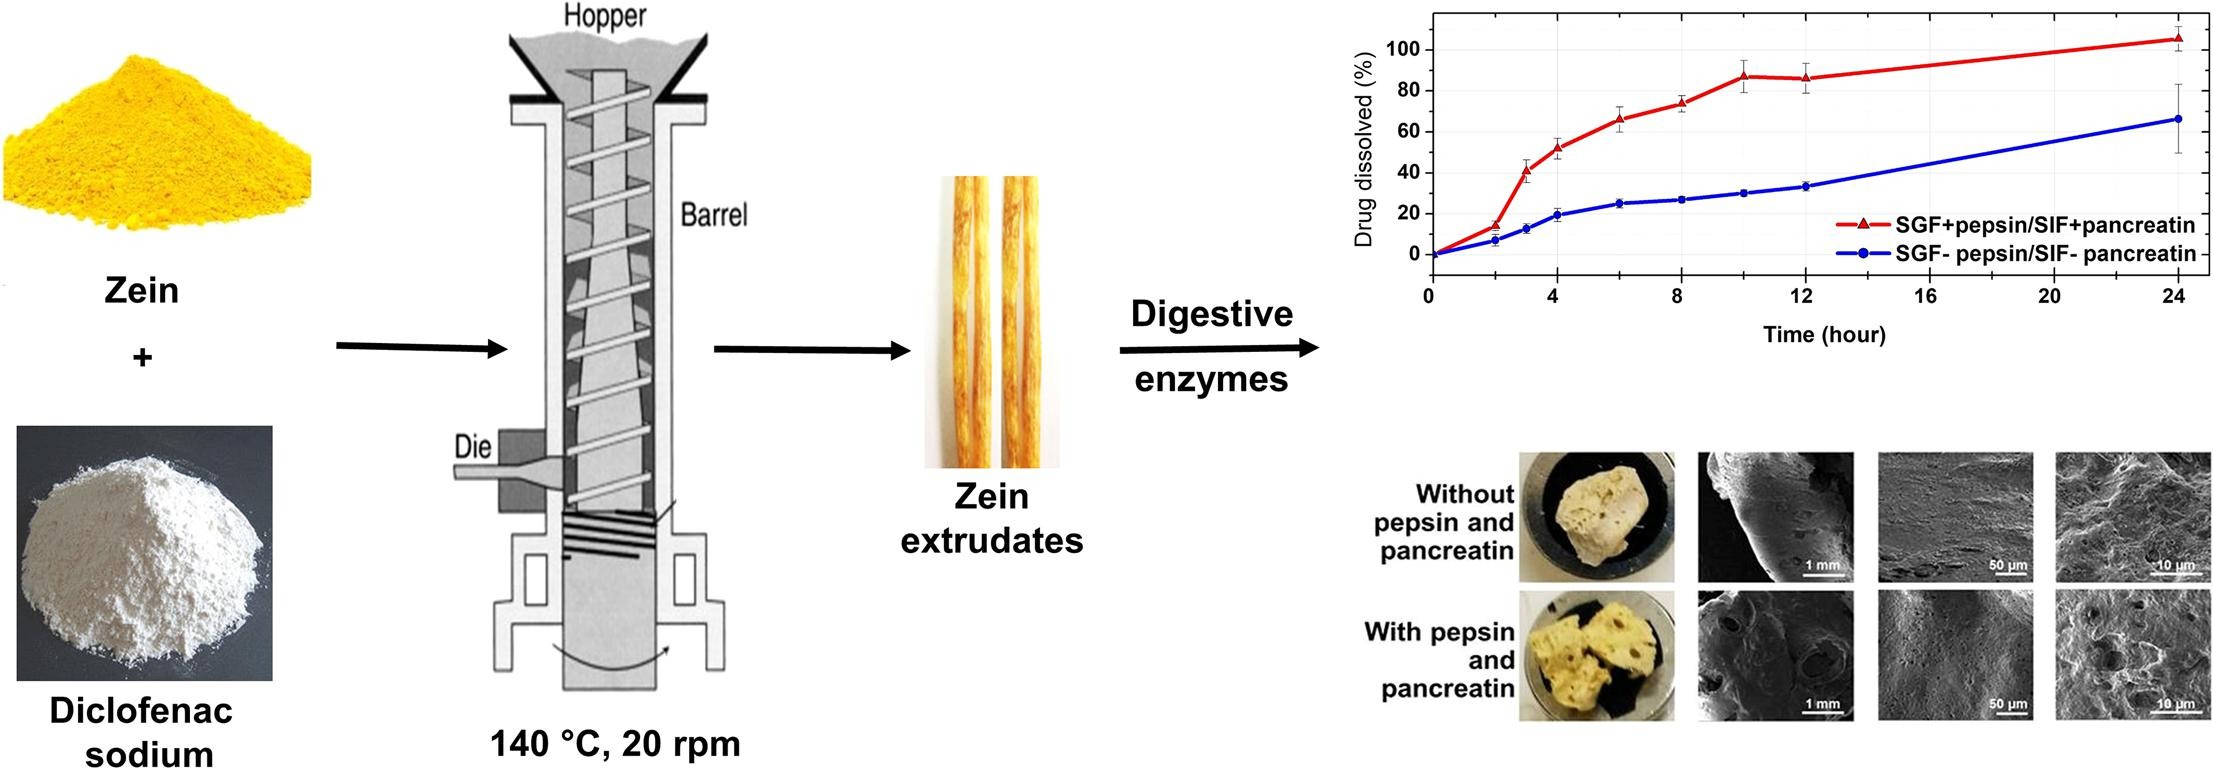 Hot melt extruded zein for controlled delivery of diclofenac sodium